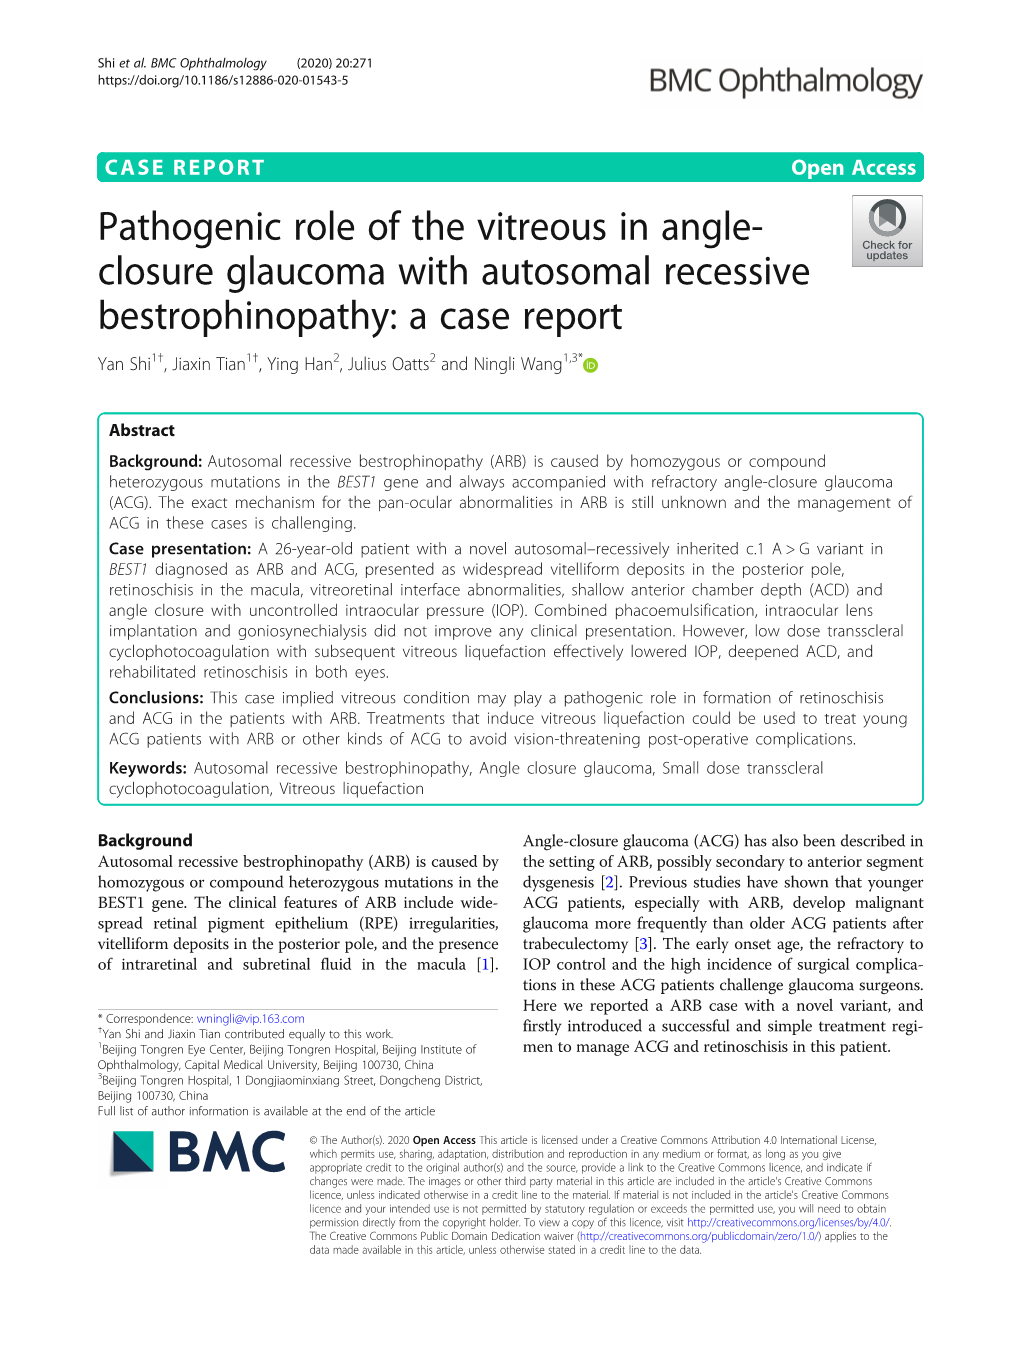 Pathogenic Role of the Vitreous in Angle-Closure Glaucoma with Autosomal Recessive Bestrophinopathy